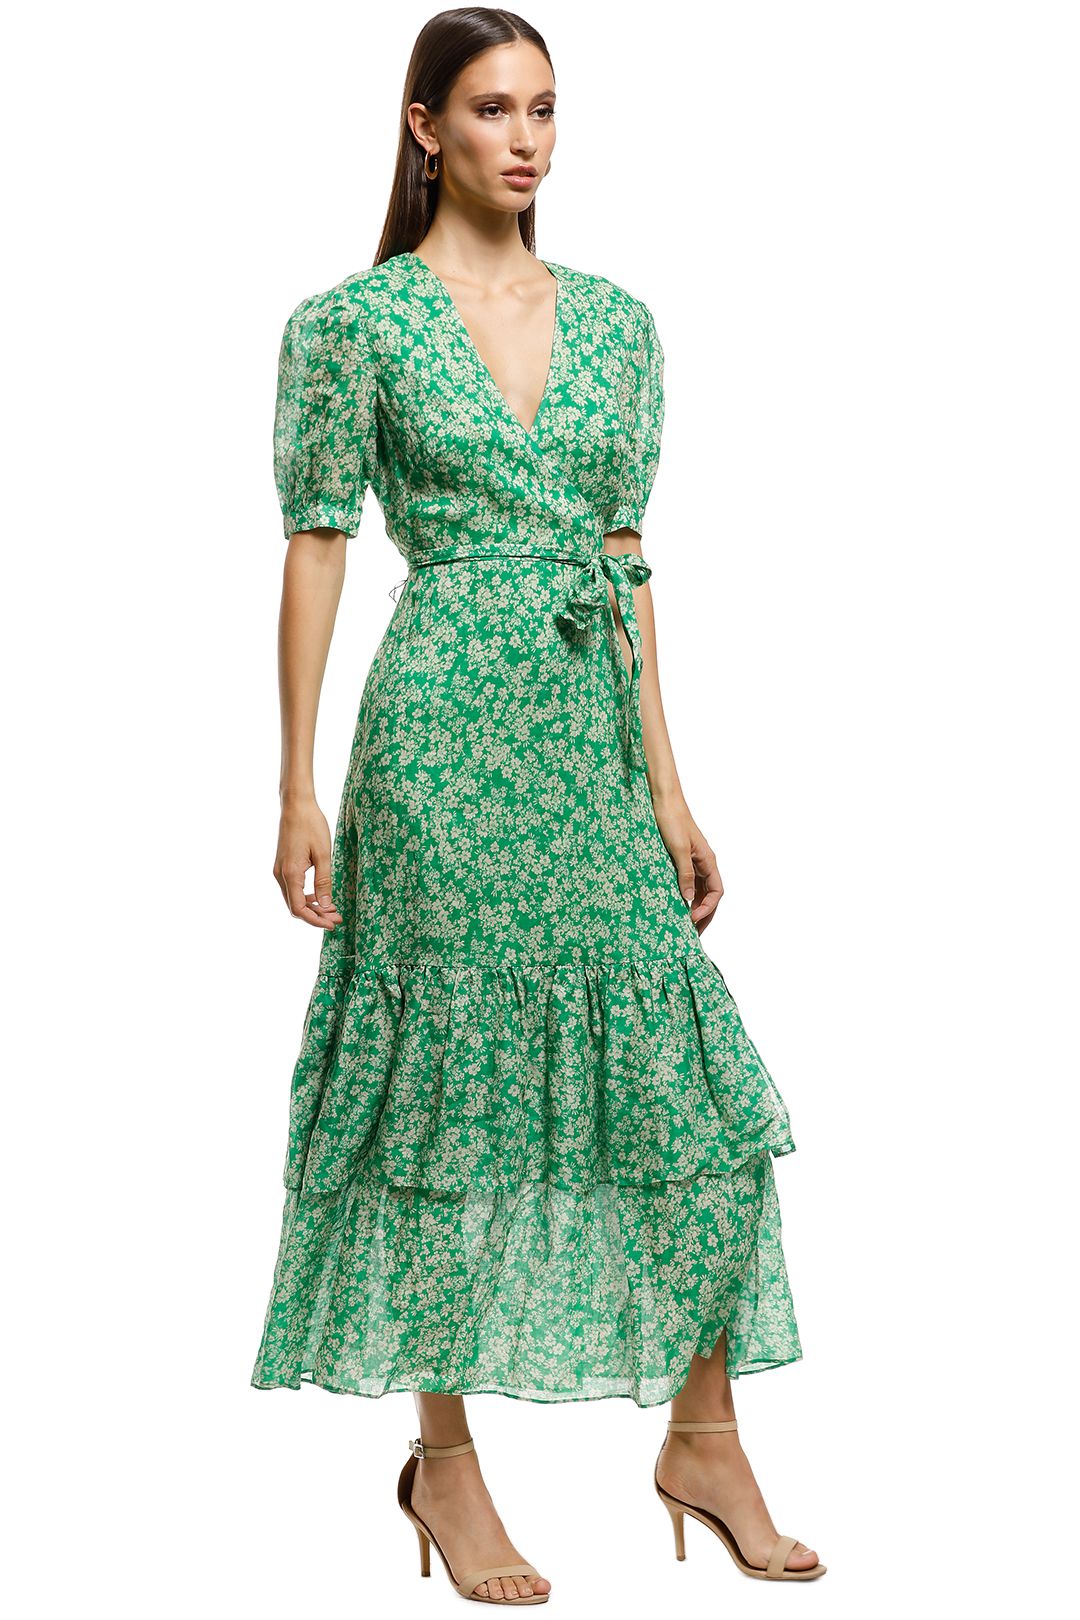 Green With Envy Midi Dress by Talulah for Rent